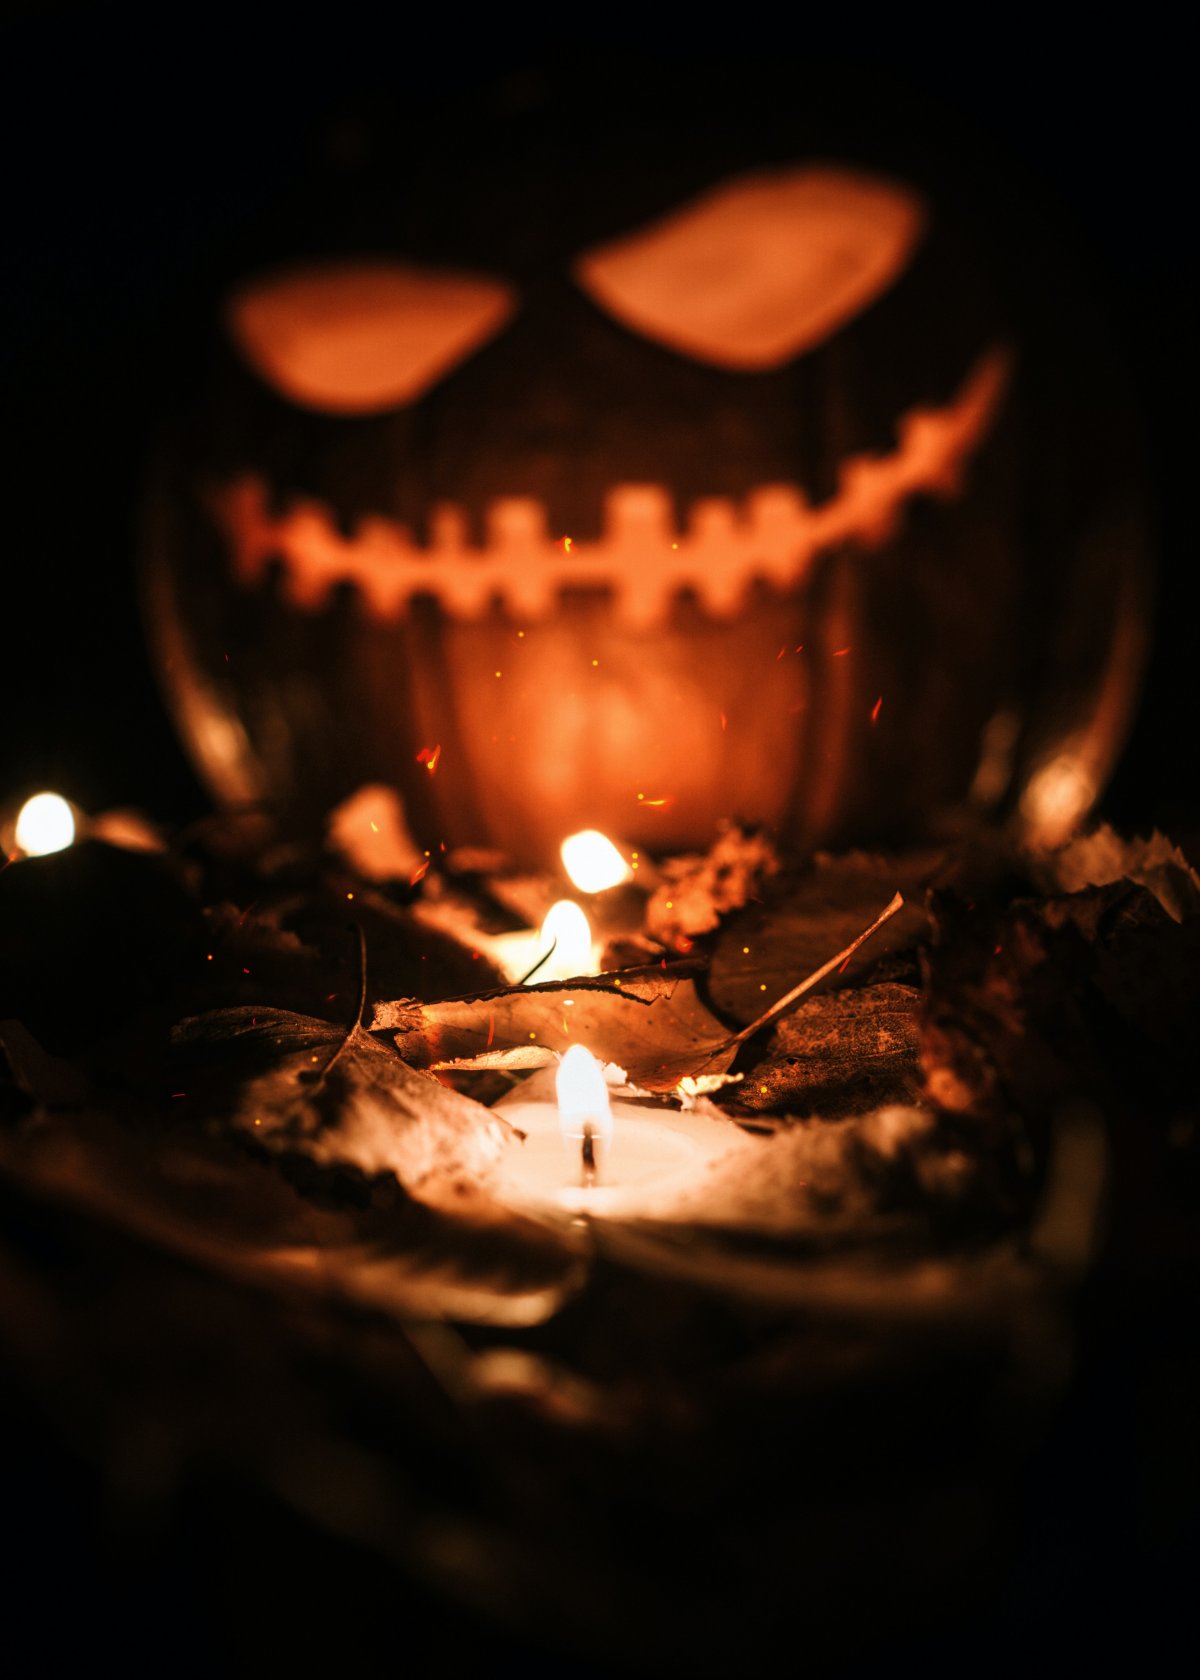  Welcome to the approaching Time of the Ancestors, celebrated in both northern and southern hemispheres as Halloween 